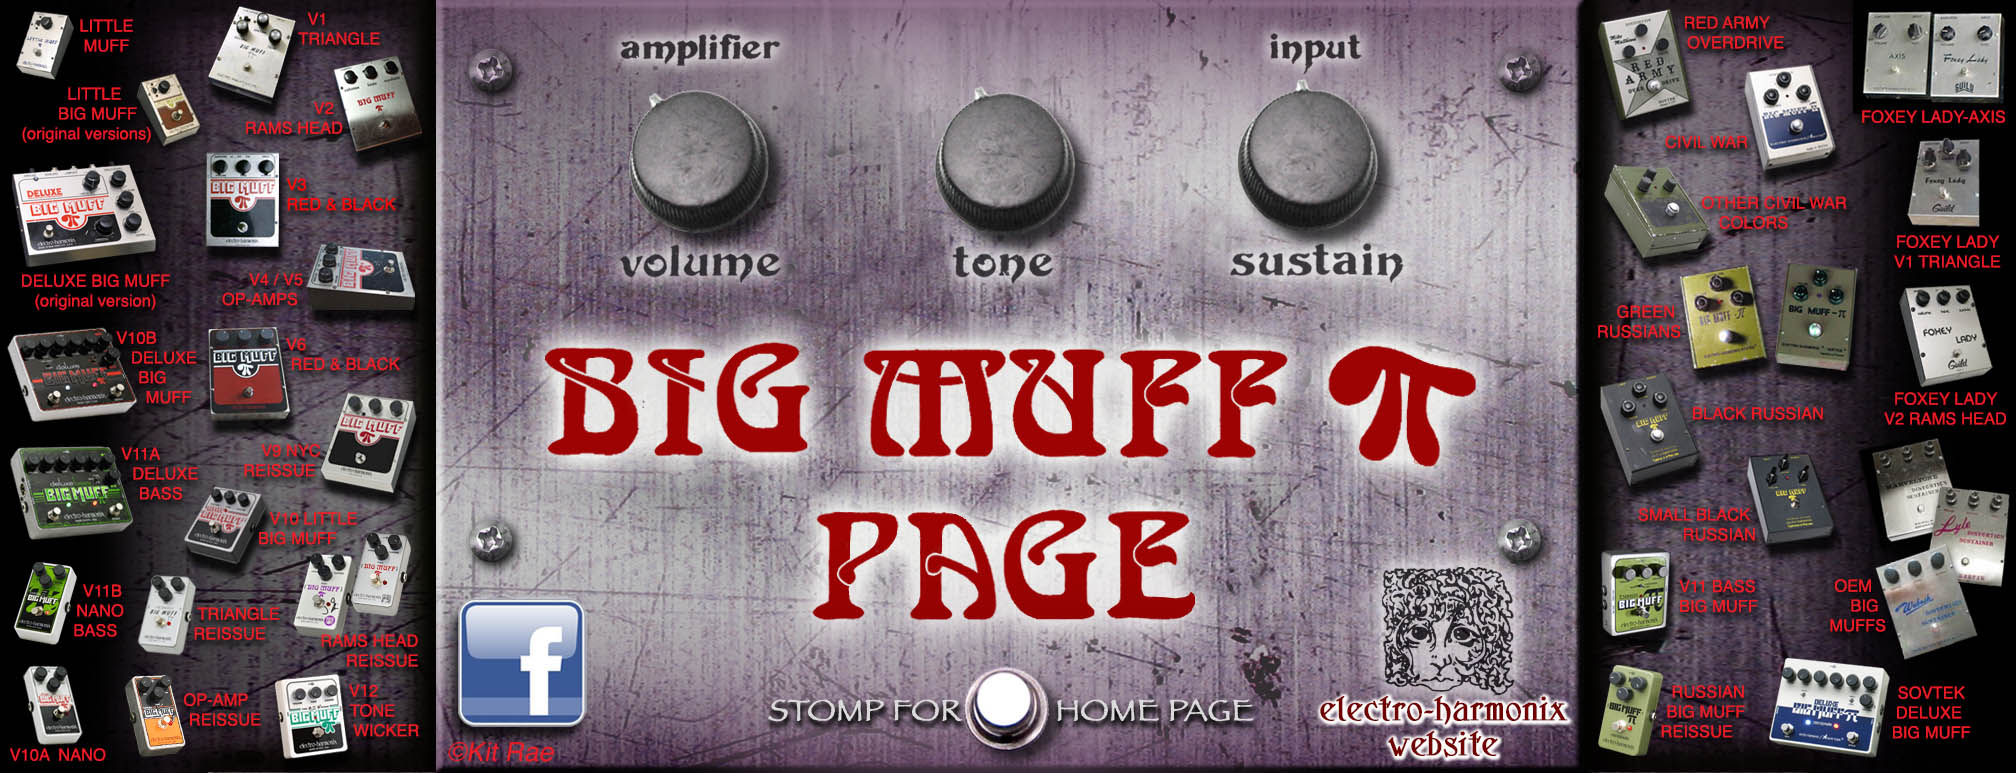 The Big Muff Pi Home Page